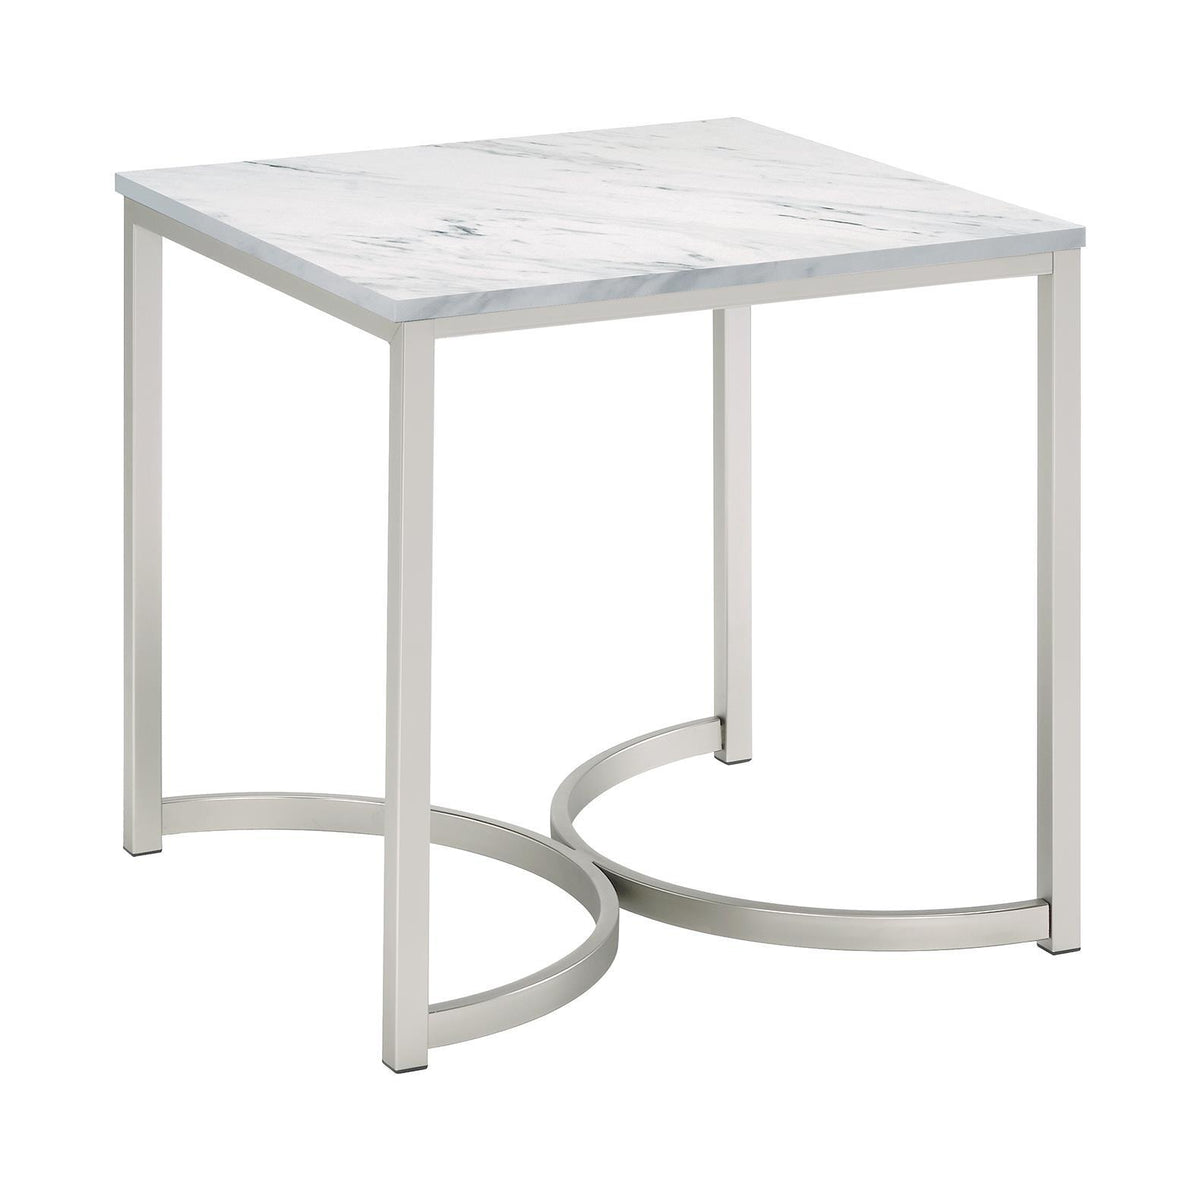 Leona Faux Marble Square End Table White and Satin Nickel - Half Price Furniture